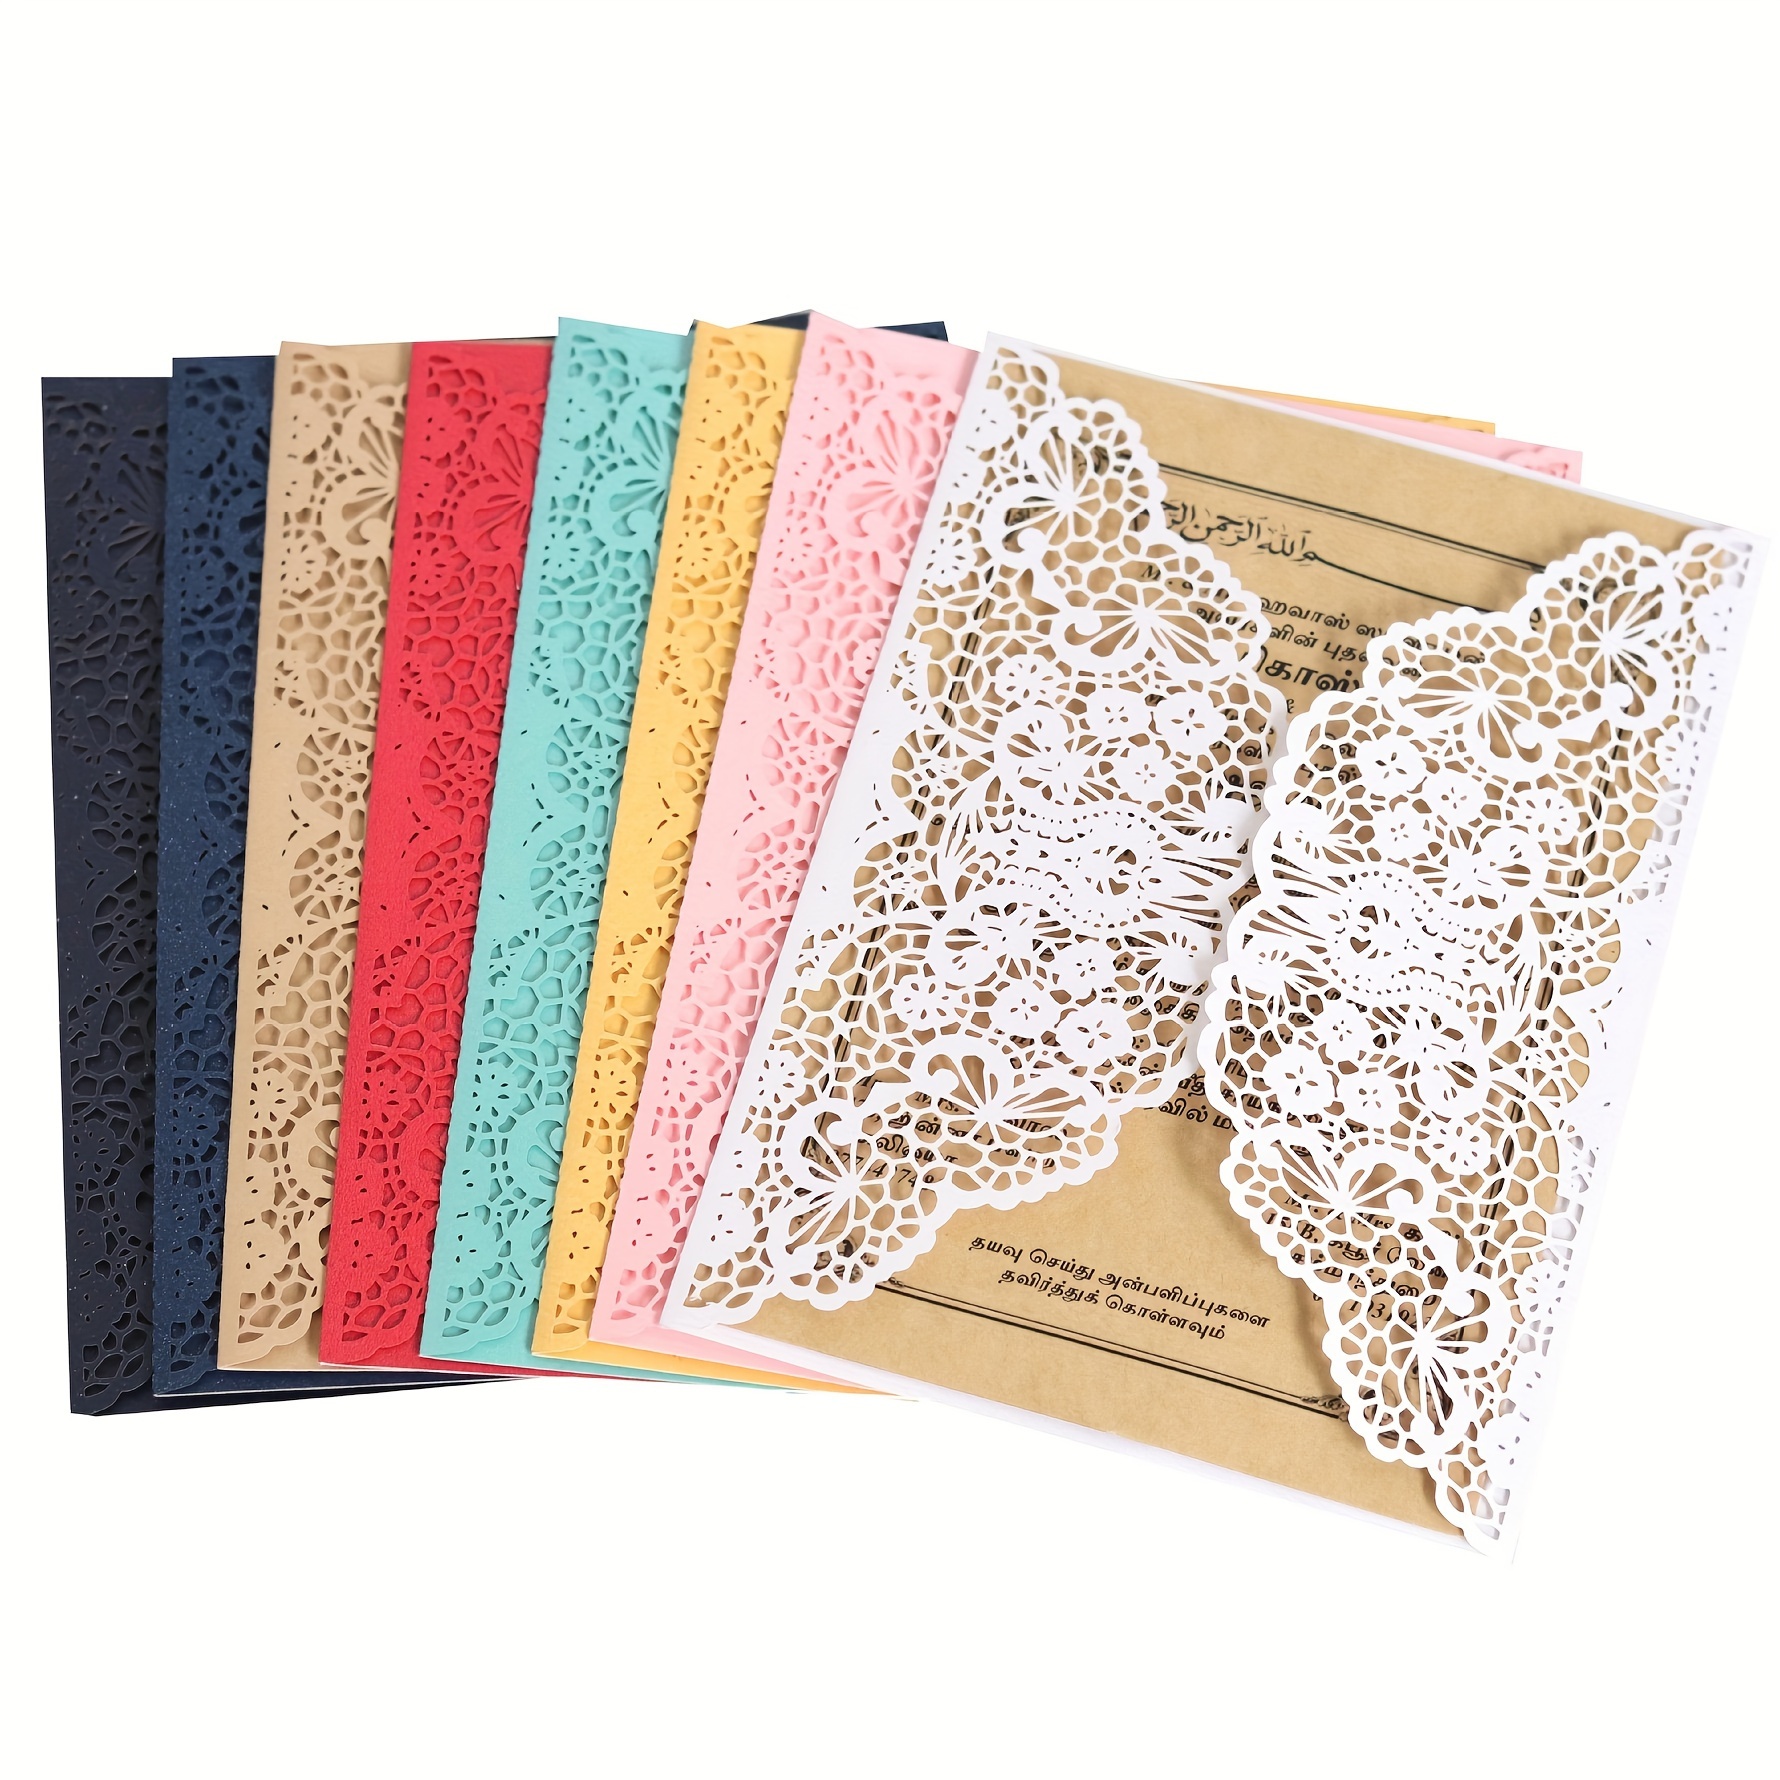 

20pcs Laser Cut Lace Invitation Cards For Wedding, Engagement, Birthday, Baptism, And Party Decorations - Paper Material, No Electricity Required, Blank Inside Without Envelopes